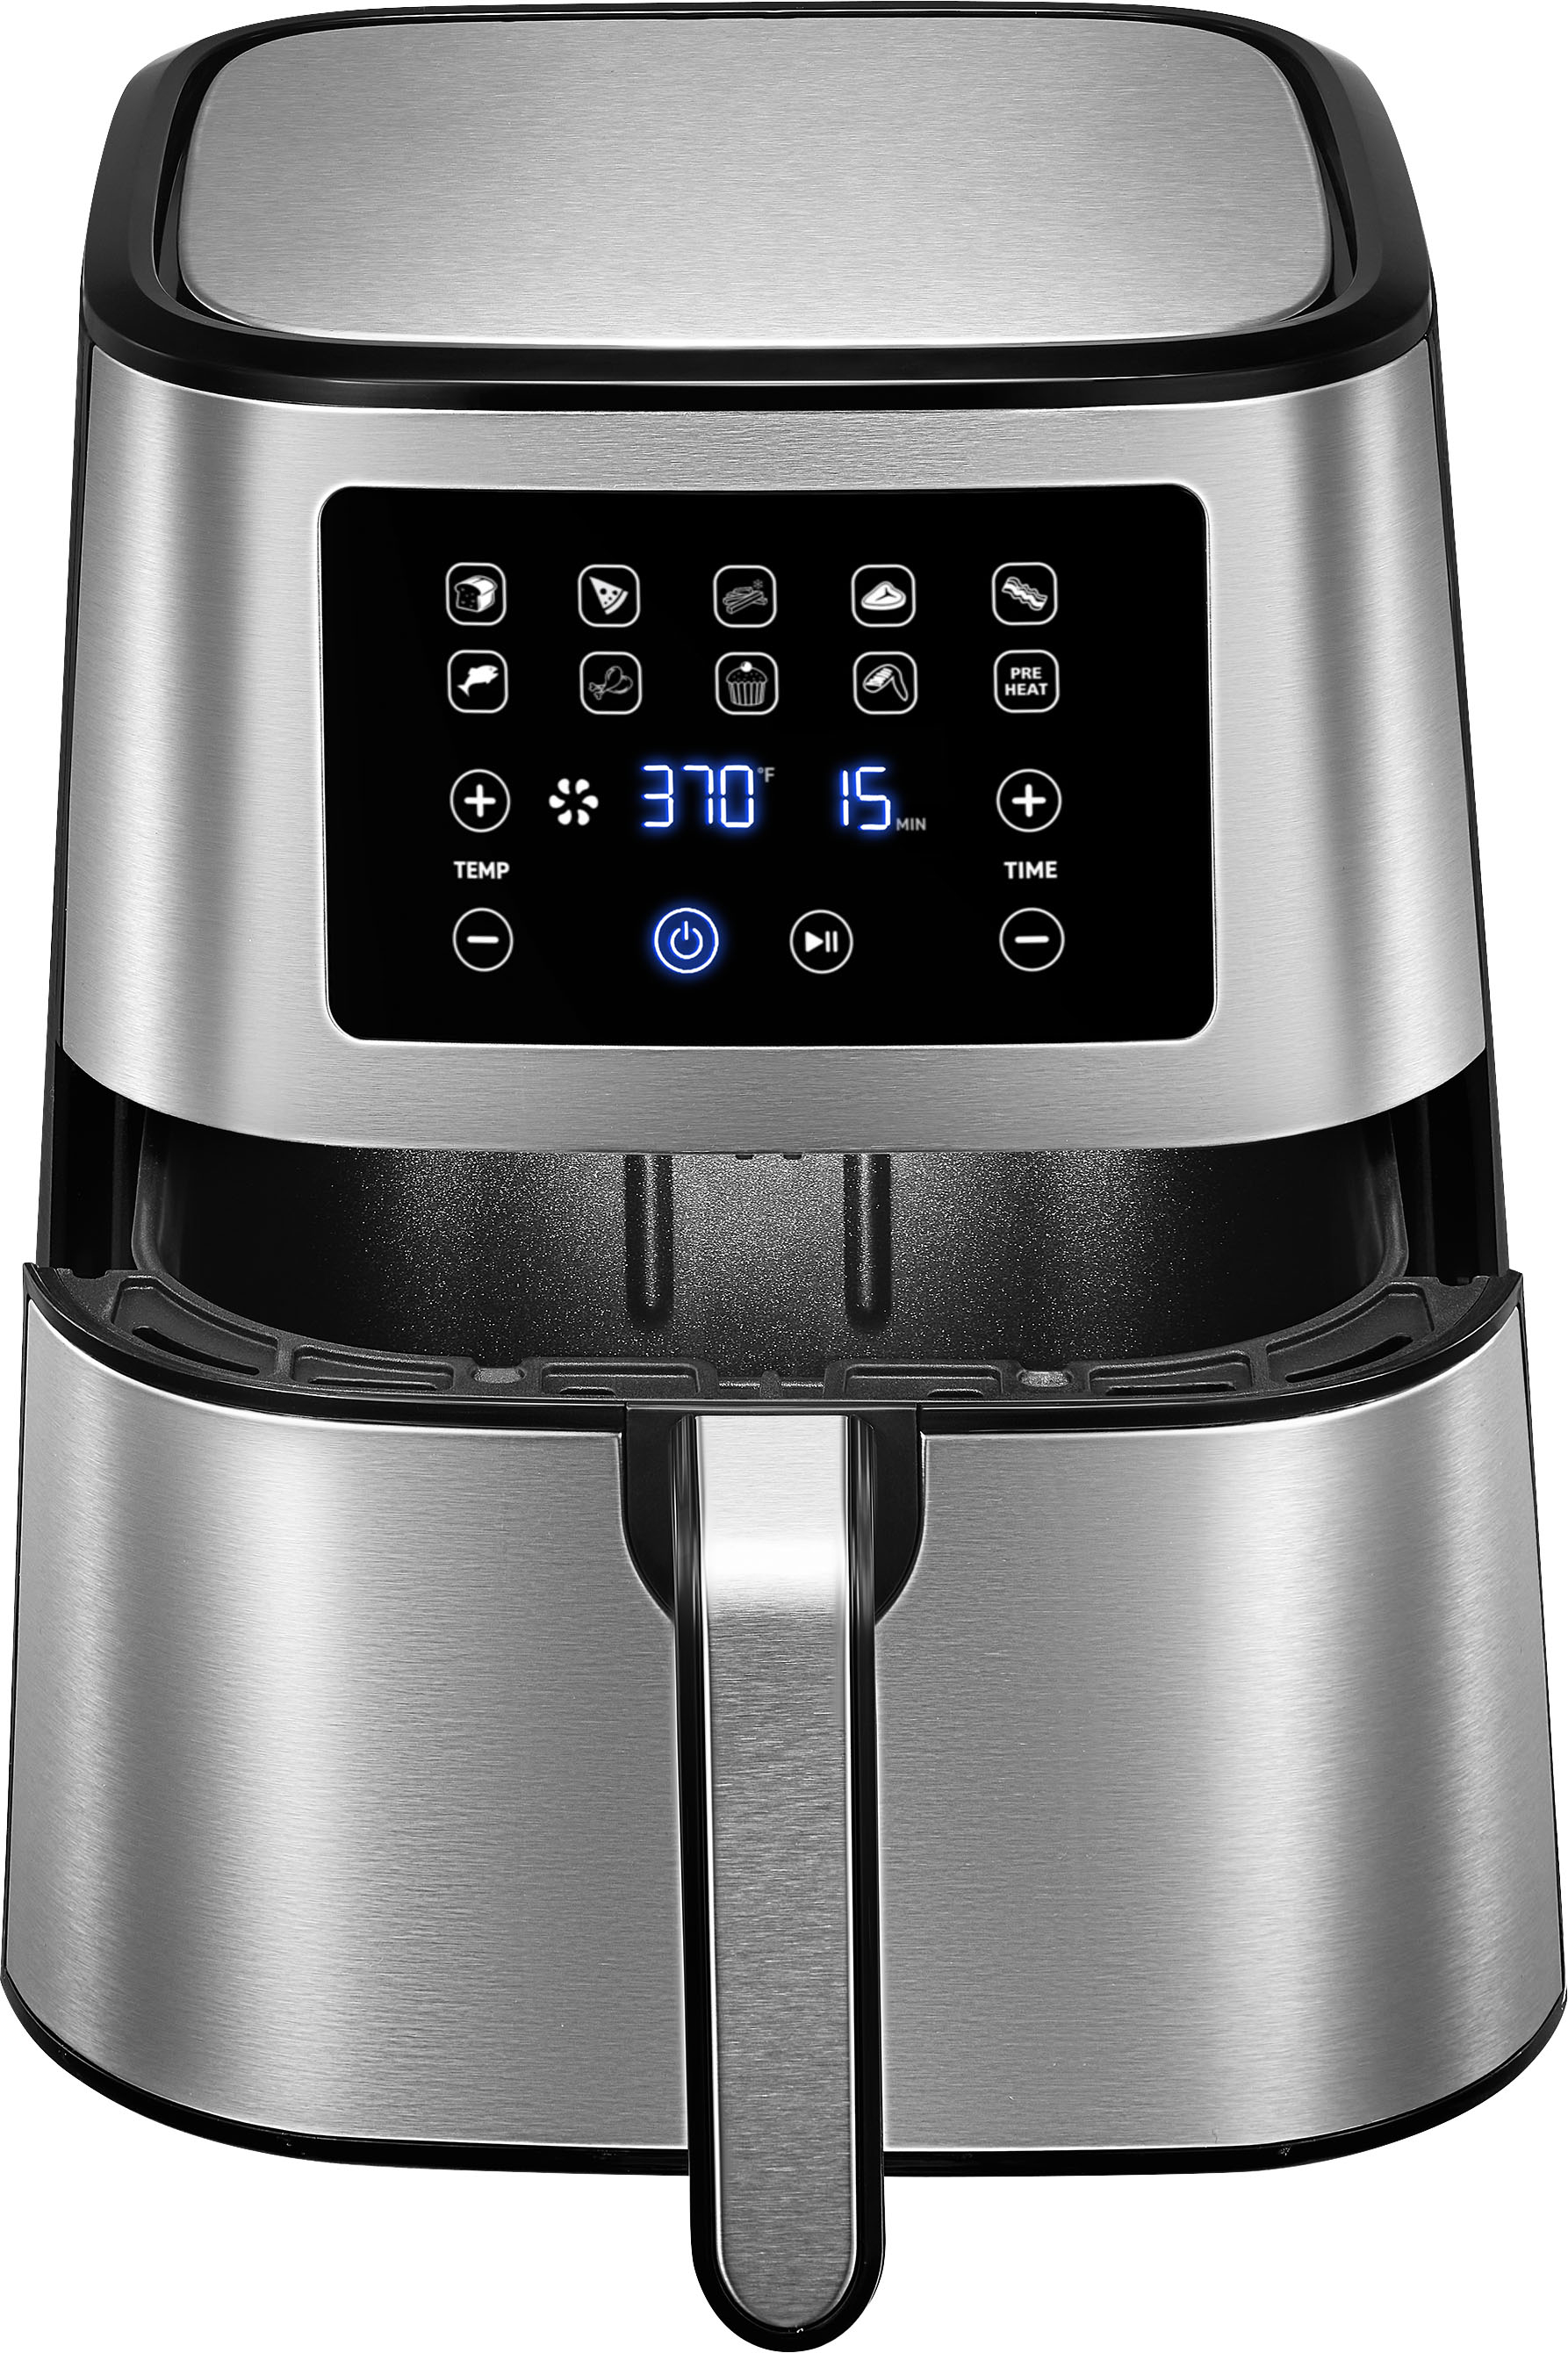 When searching for a good non toxic air fryer look for stainless steel, Best Stainless Steel Air Fryer